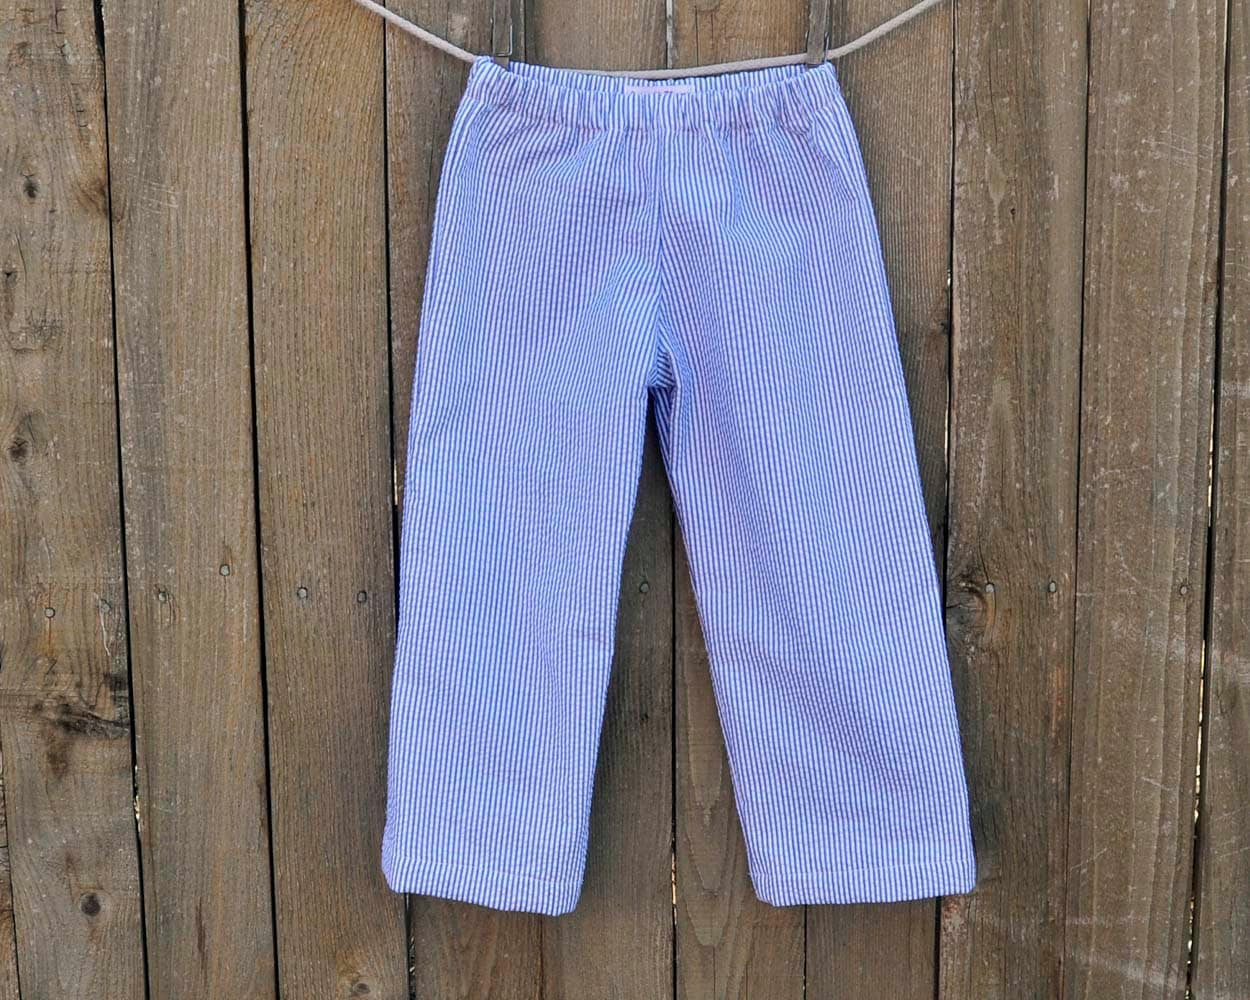 Blue Seersucker Pants or Shorts Fully Lined many colors | Etsy